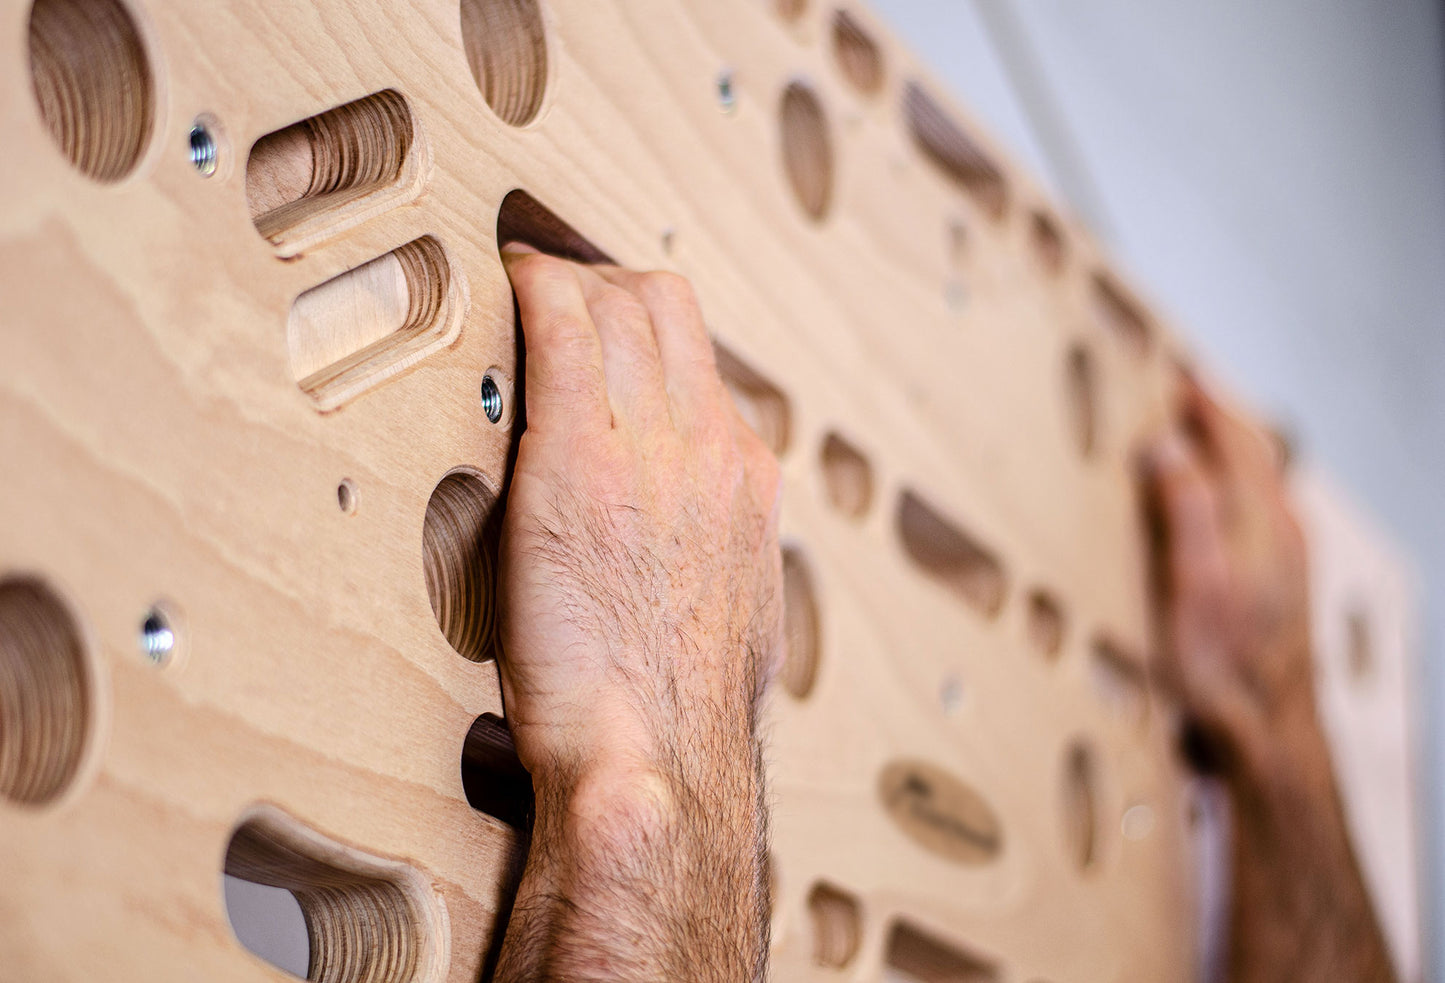 Kraxlboard The Wall - The multifunctional training wall for the ultimate kick